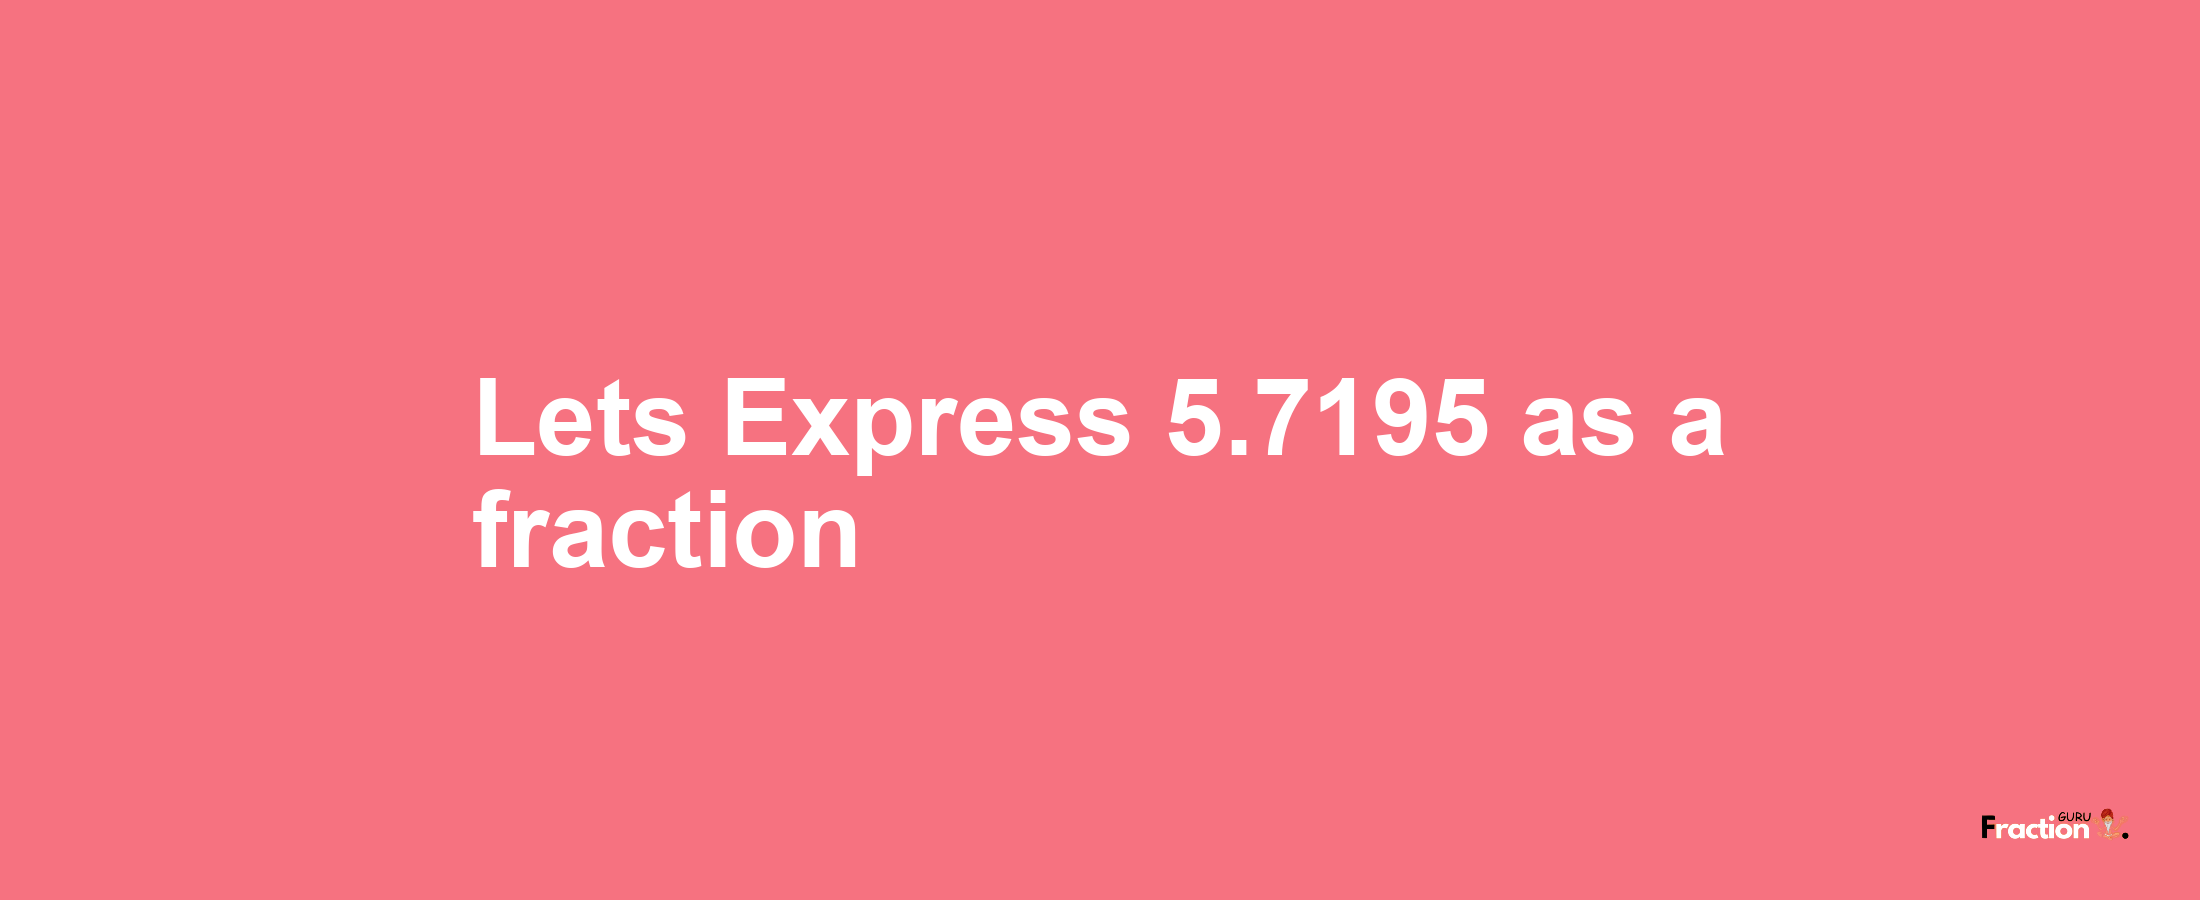 Lets Express 5.7195 as afraction